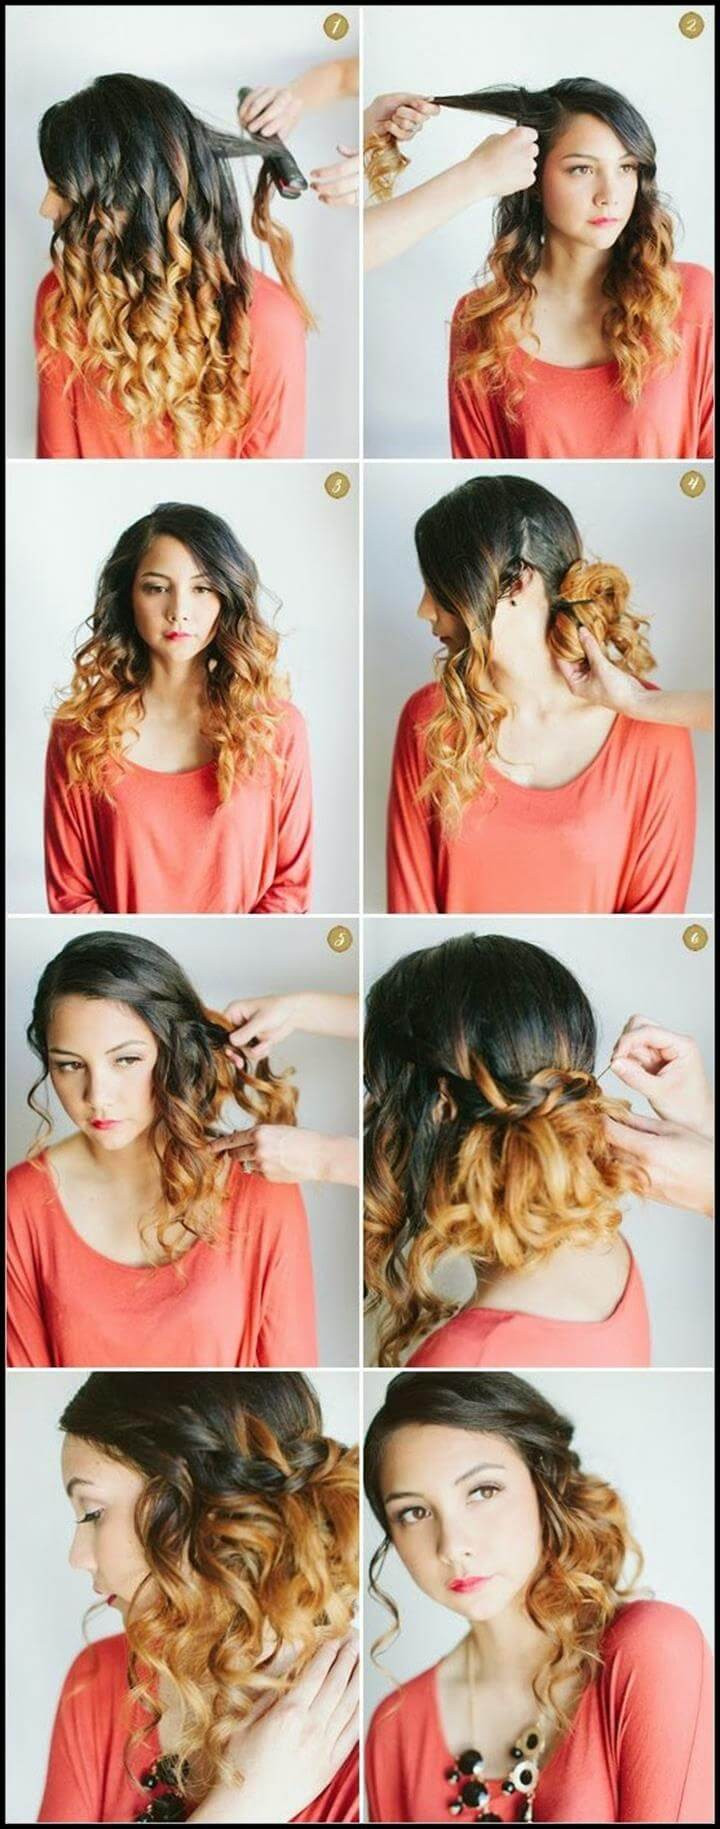 DIY Curly Hair Cut
 25 DIY Hairstyles You Can Do With These Step by Step